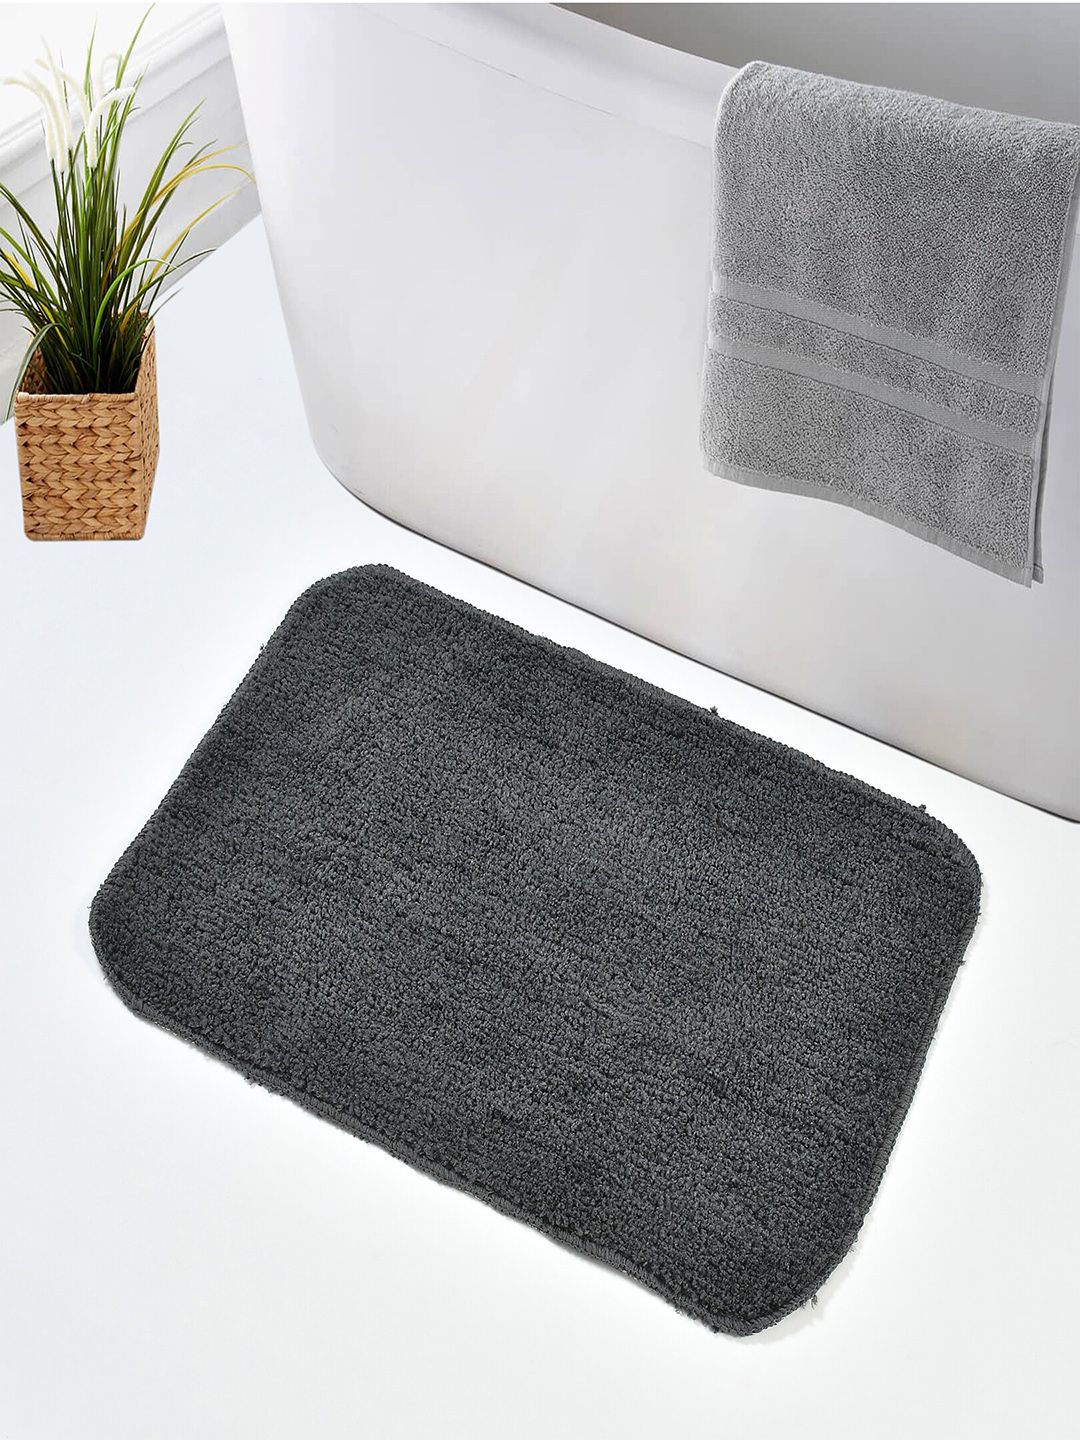 Hammer Home Set Of 2 Striped 350 GSM Microfiber Bath Rugs Price in India